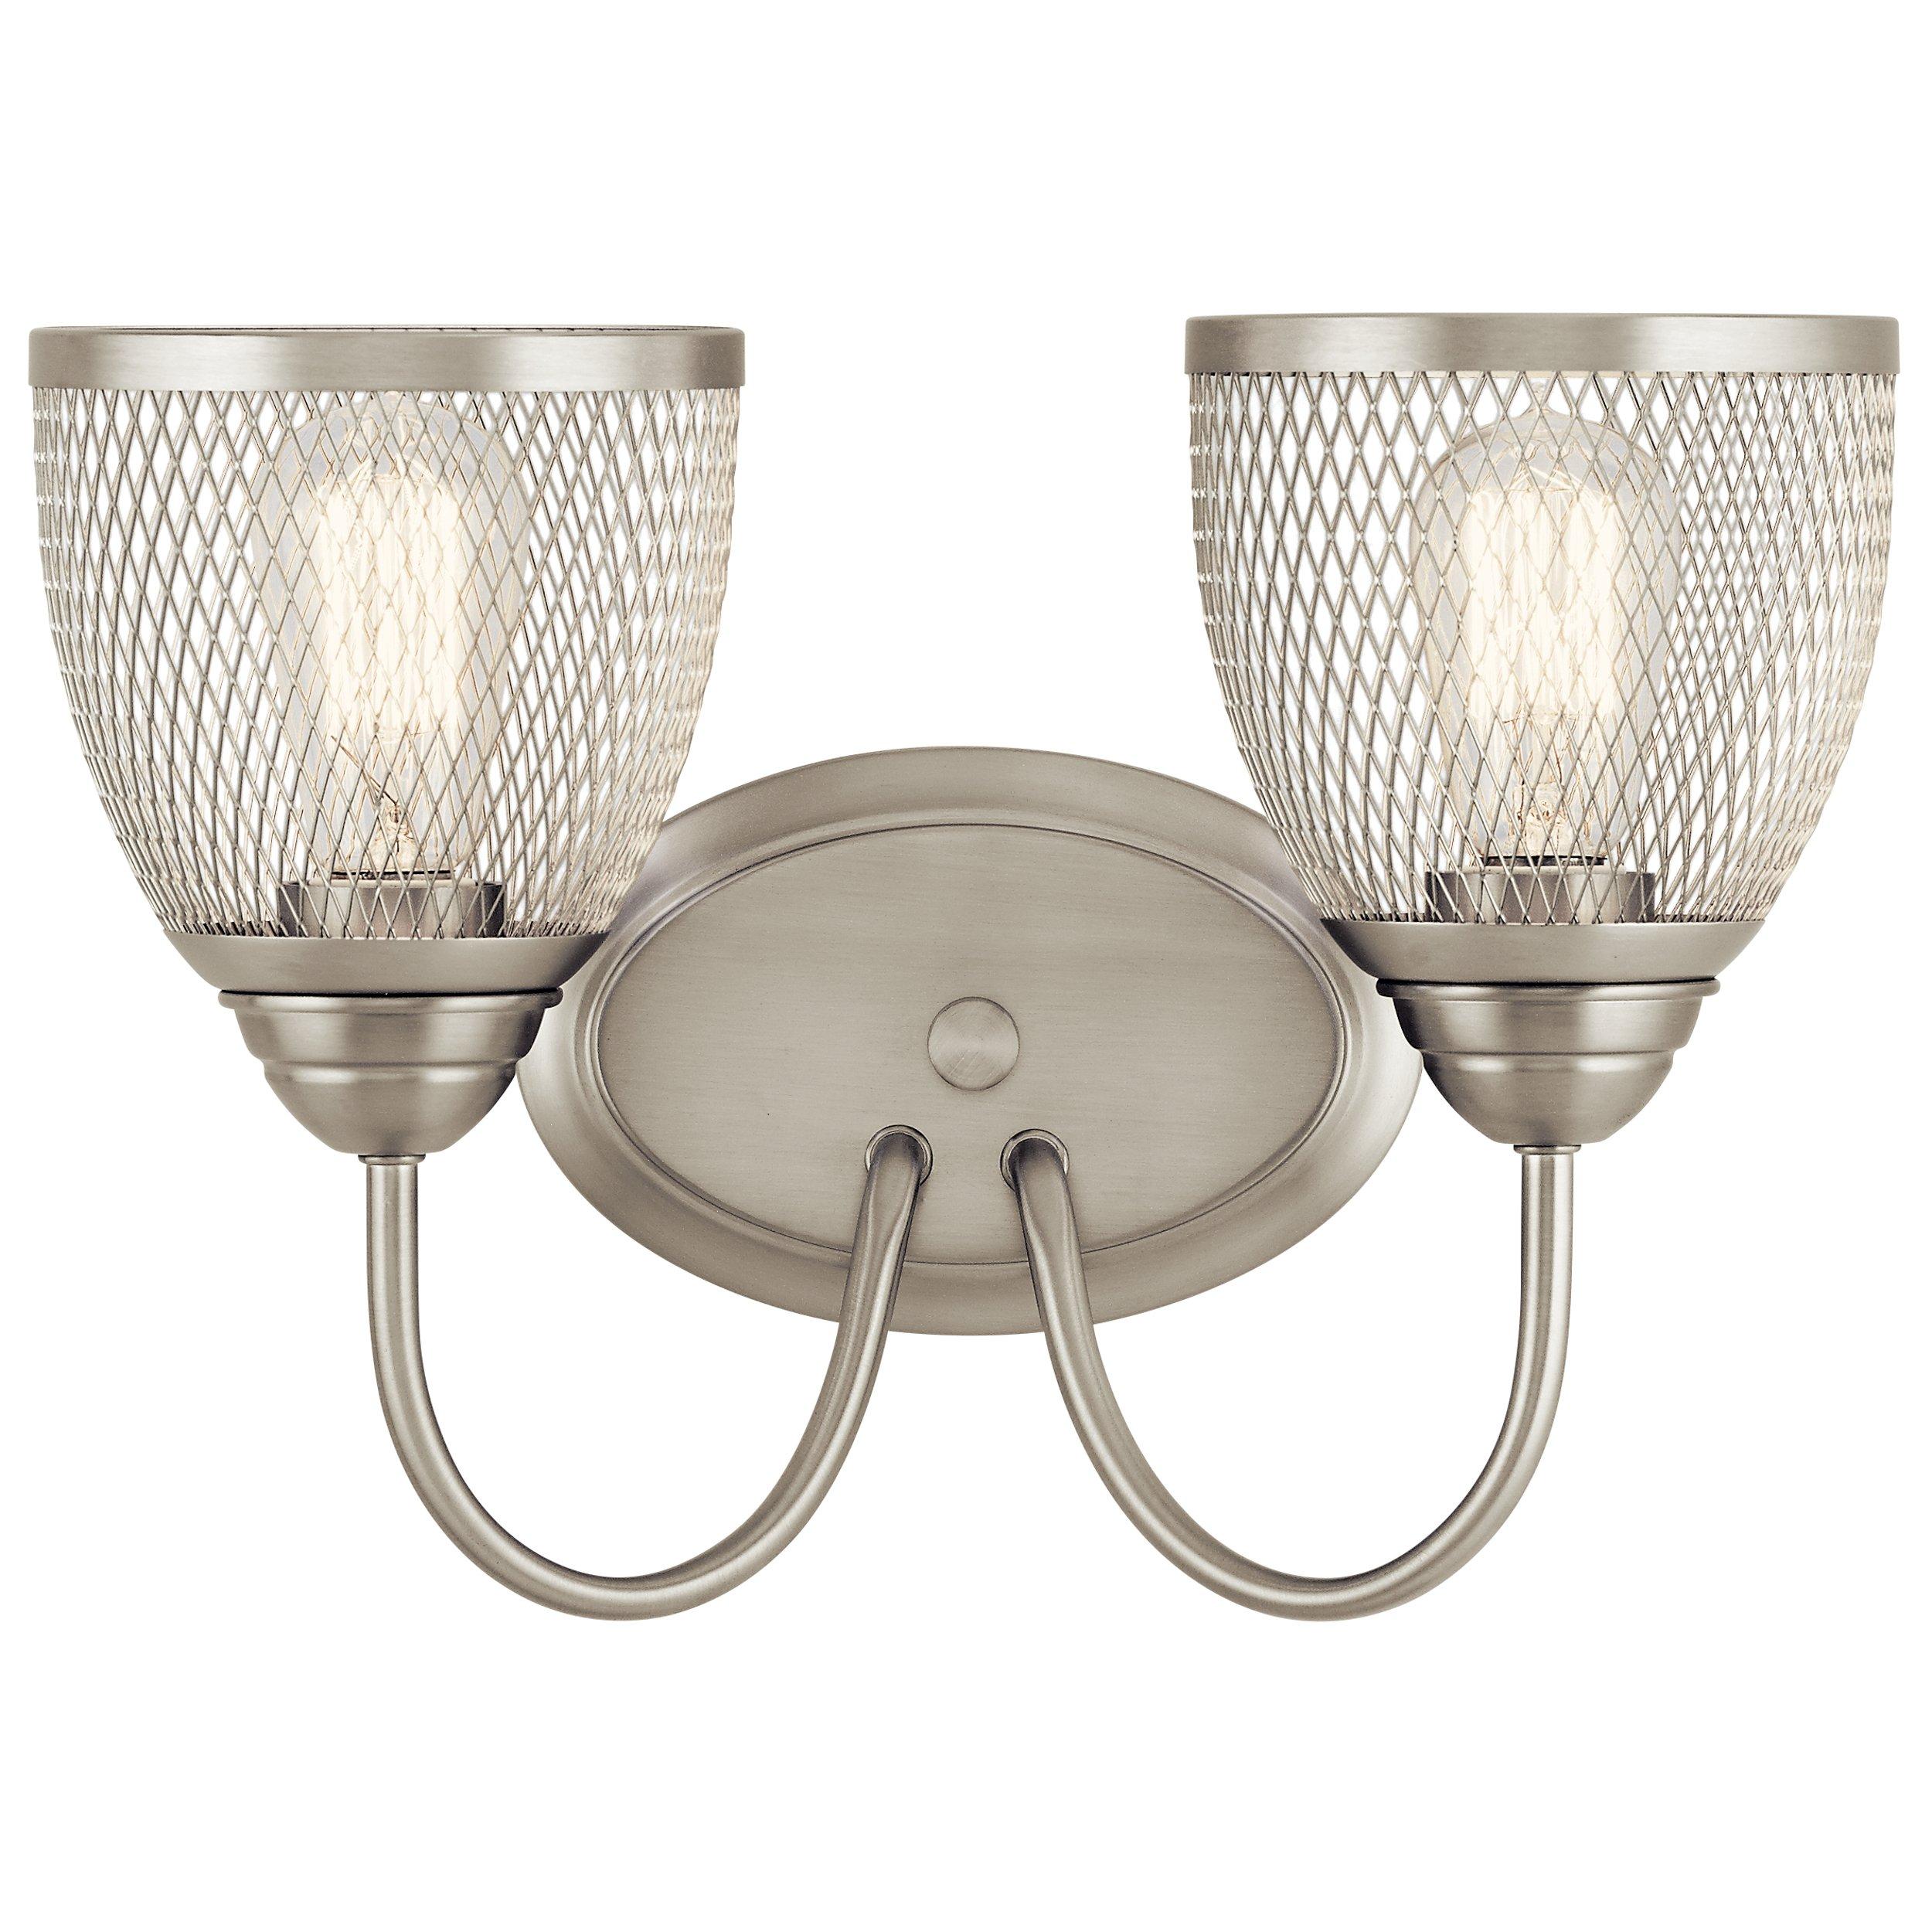 Voclain Brushed Nickel Double Sconce